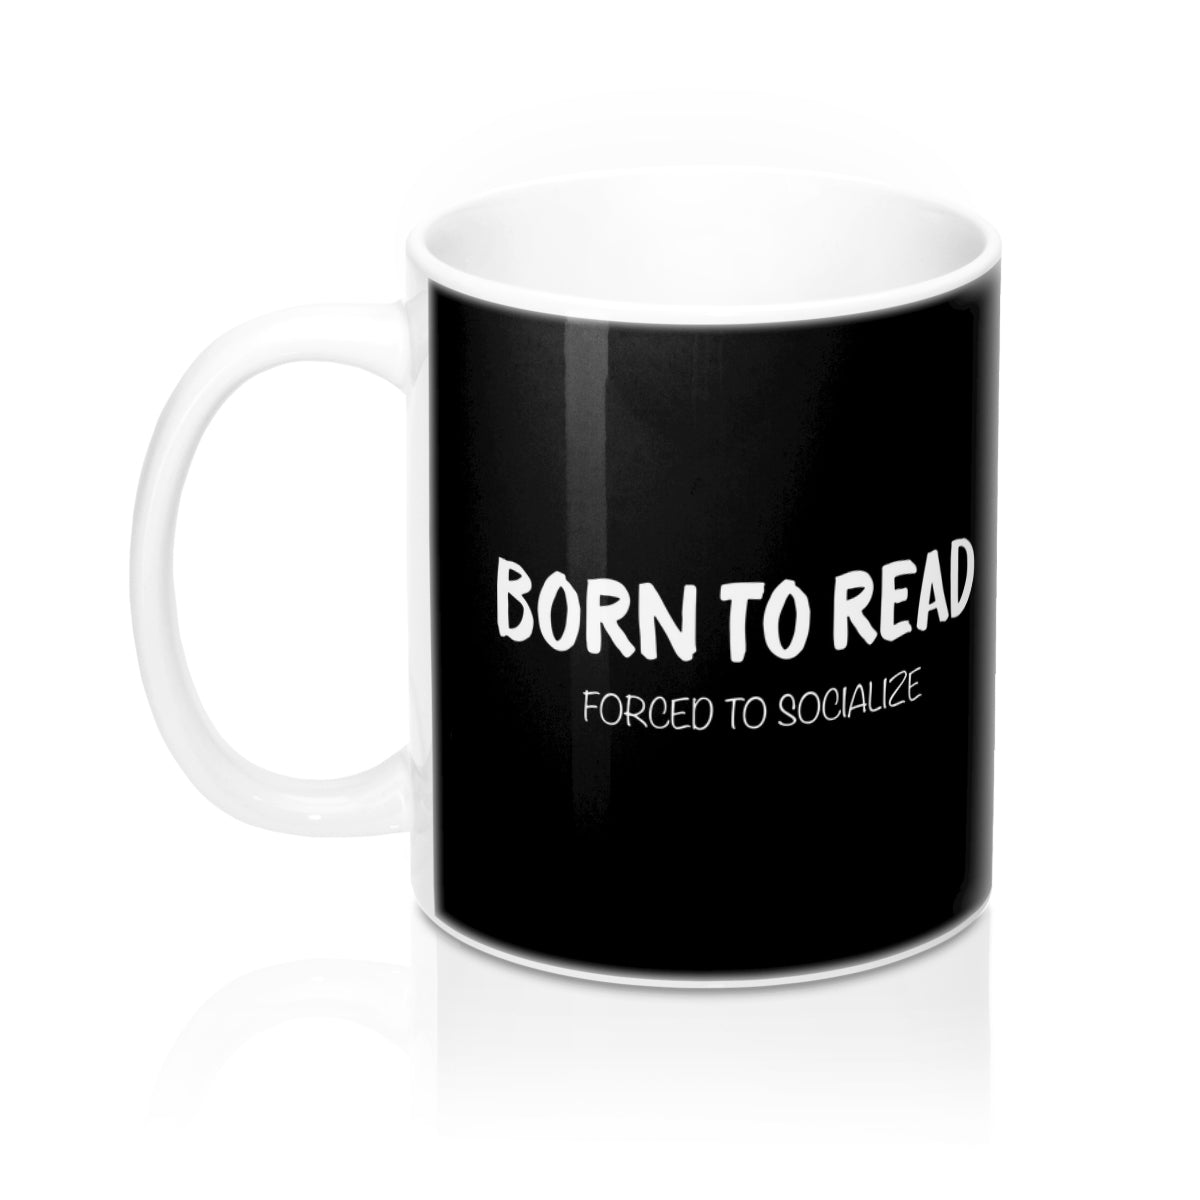 BORN TO READ. Forced to socialize. Mug - LitLifeCo.